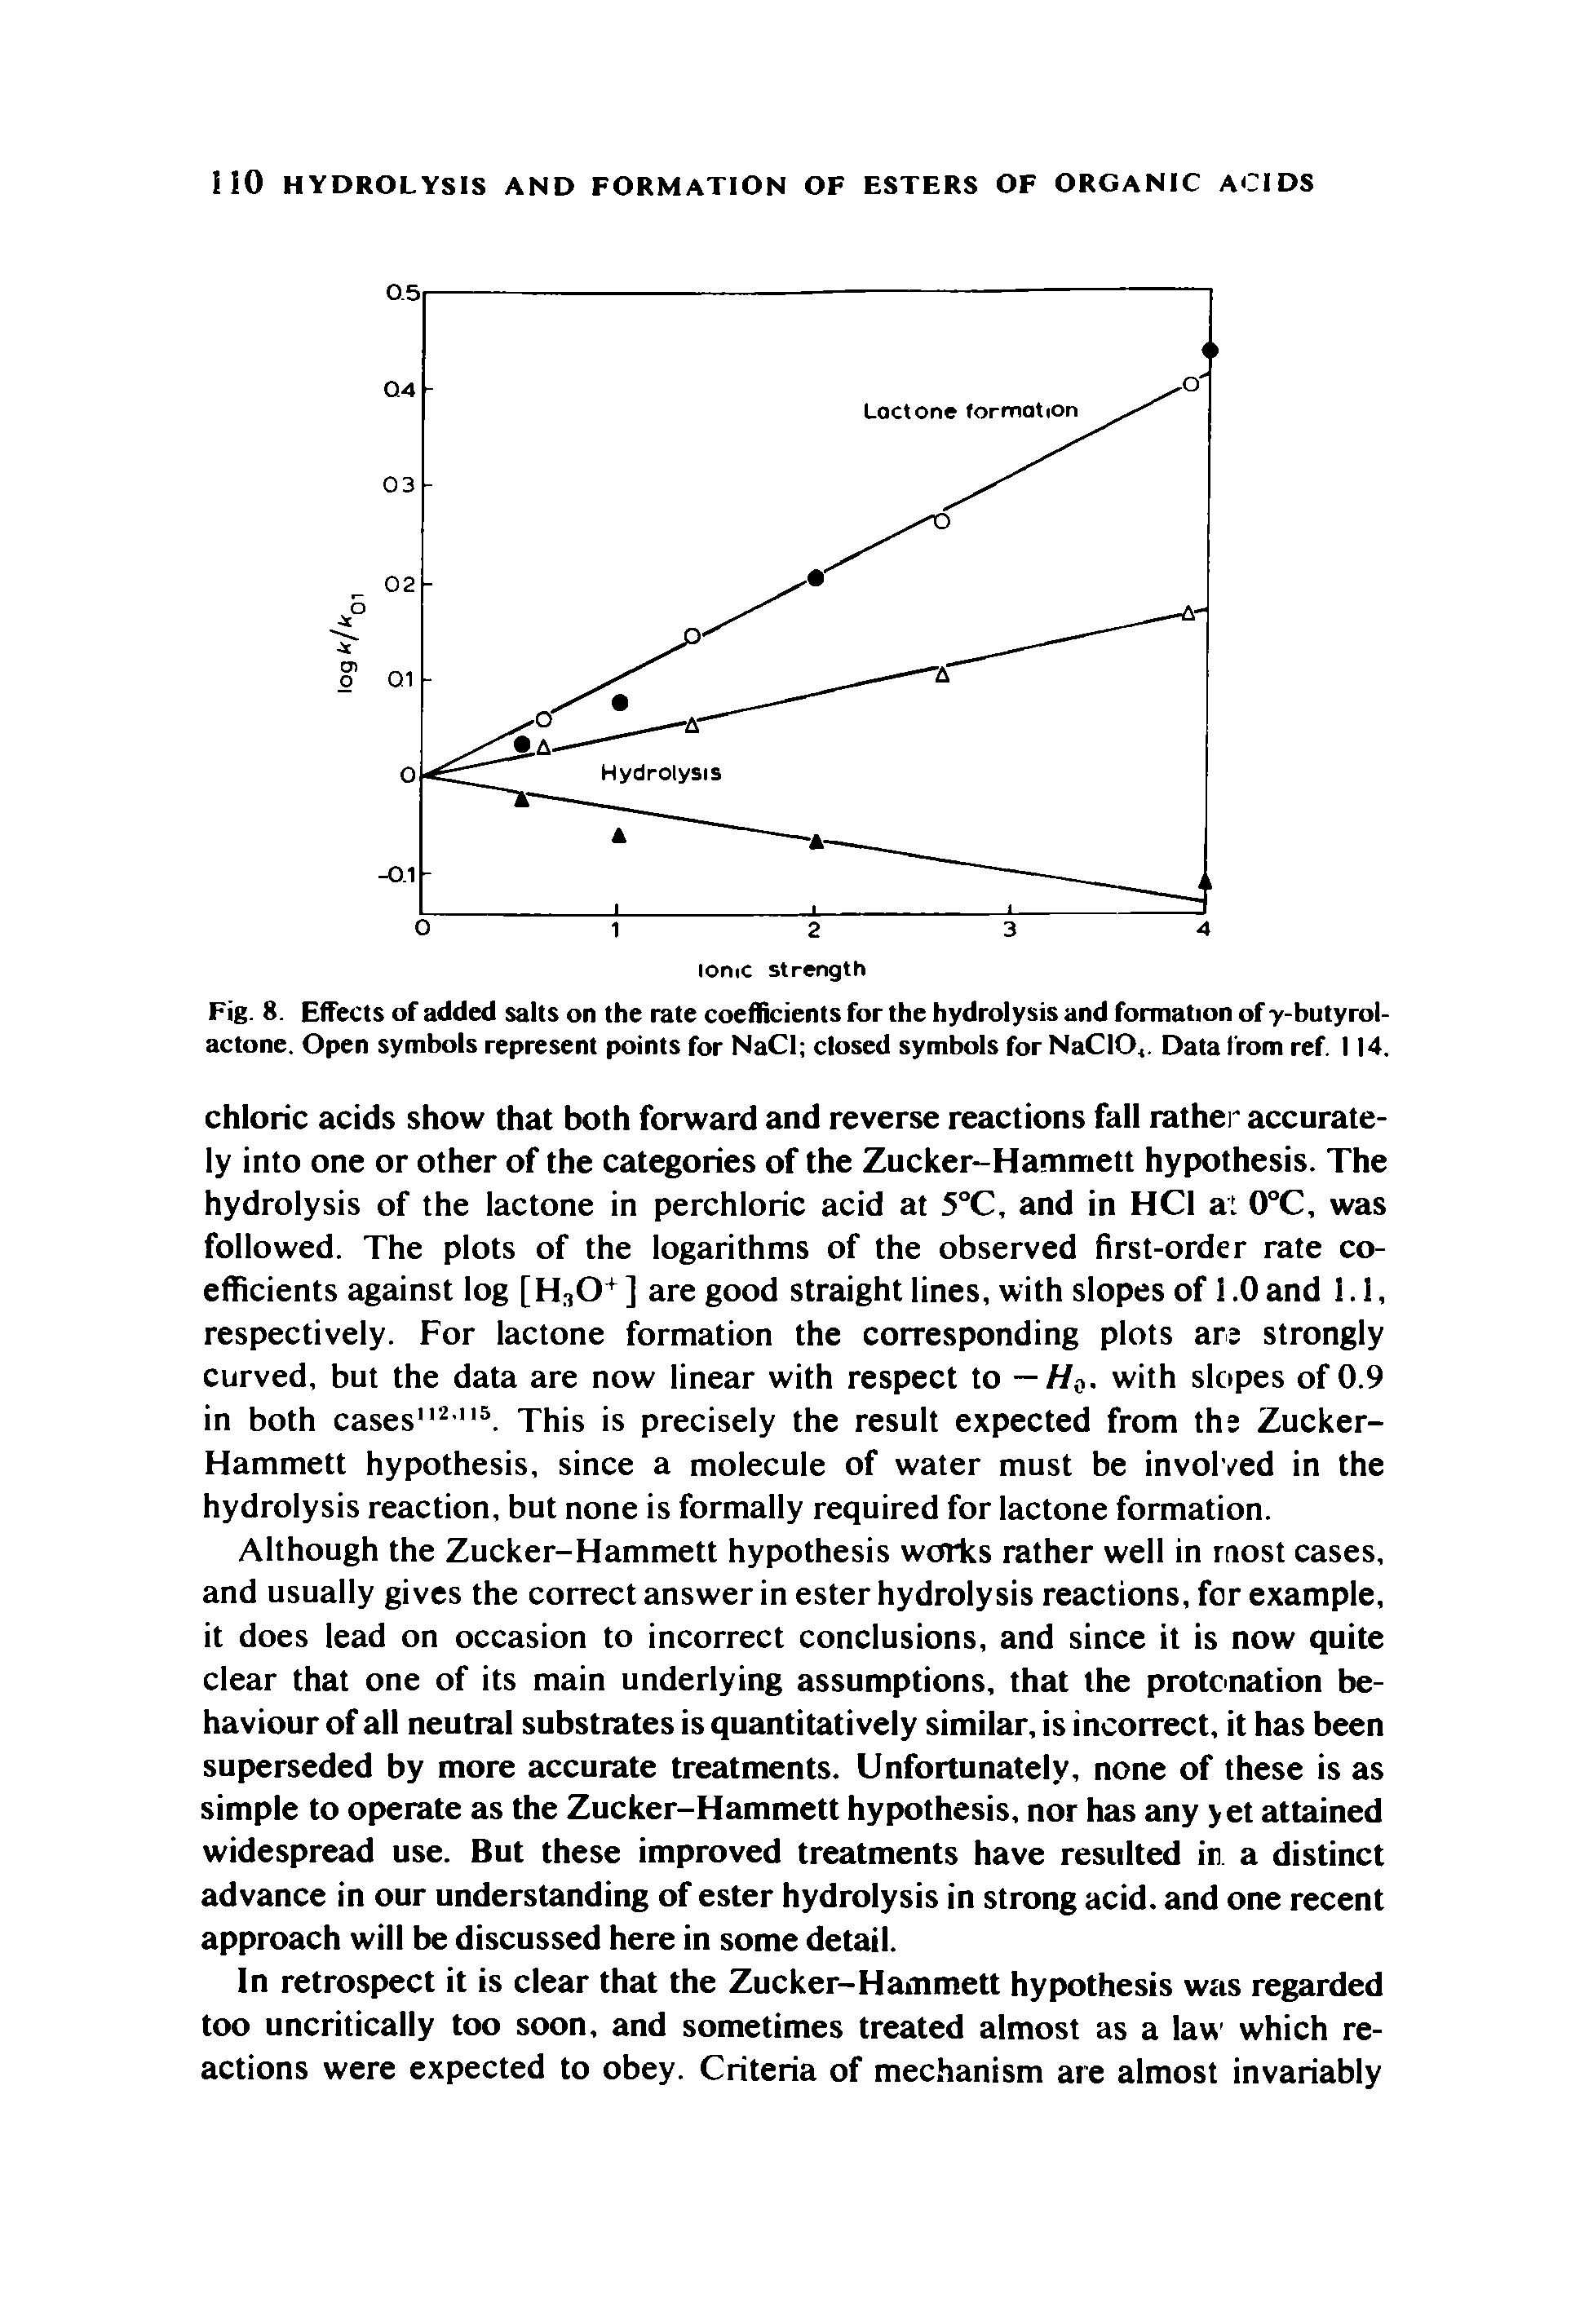 Fig. 8. Effects of added salts on the rate coefficients for the hydrolysis and formation of y-butyrol-actone. Open symbols represent points for NaCl closed symbols for NaCIO. Data from ref. 114.